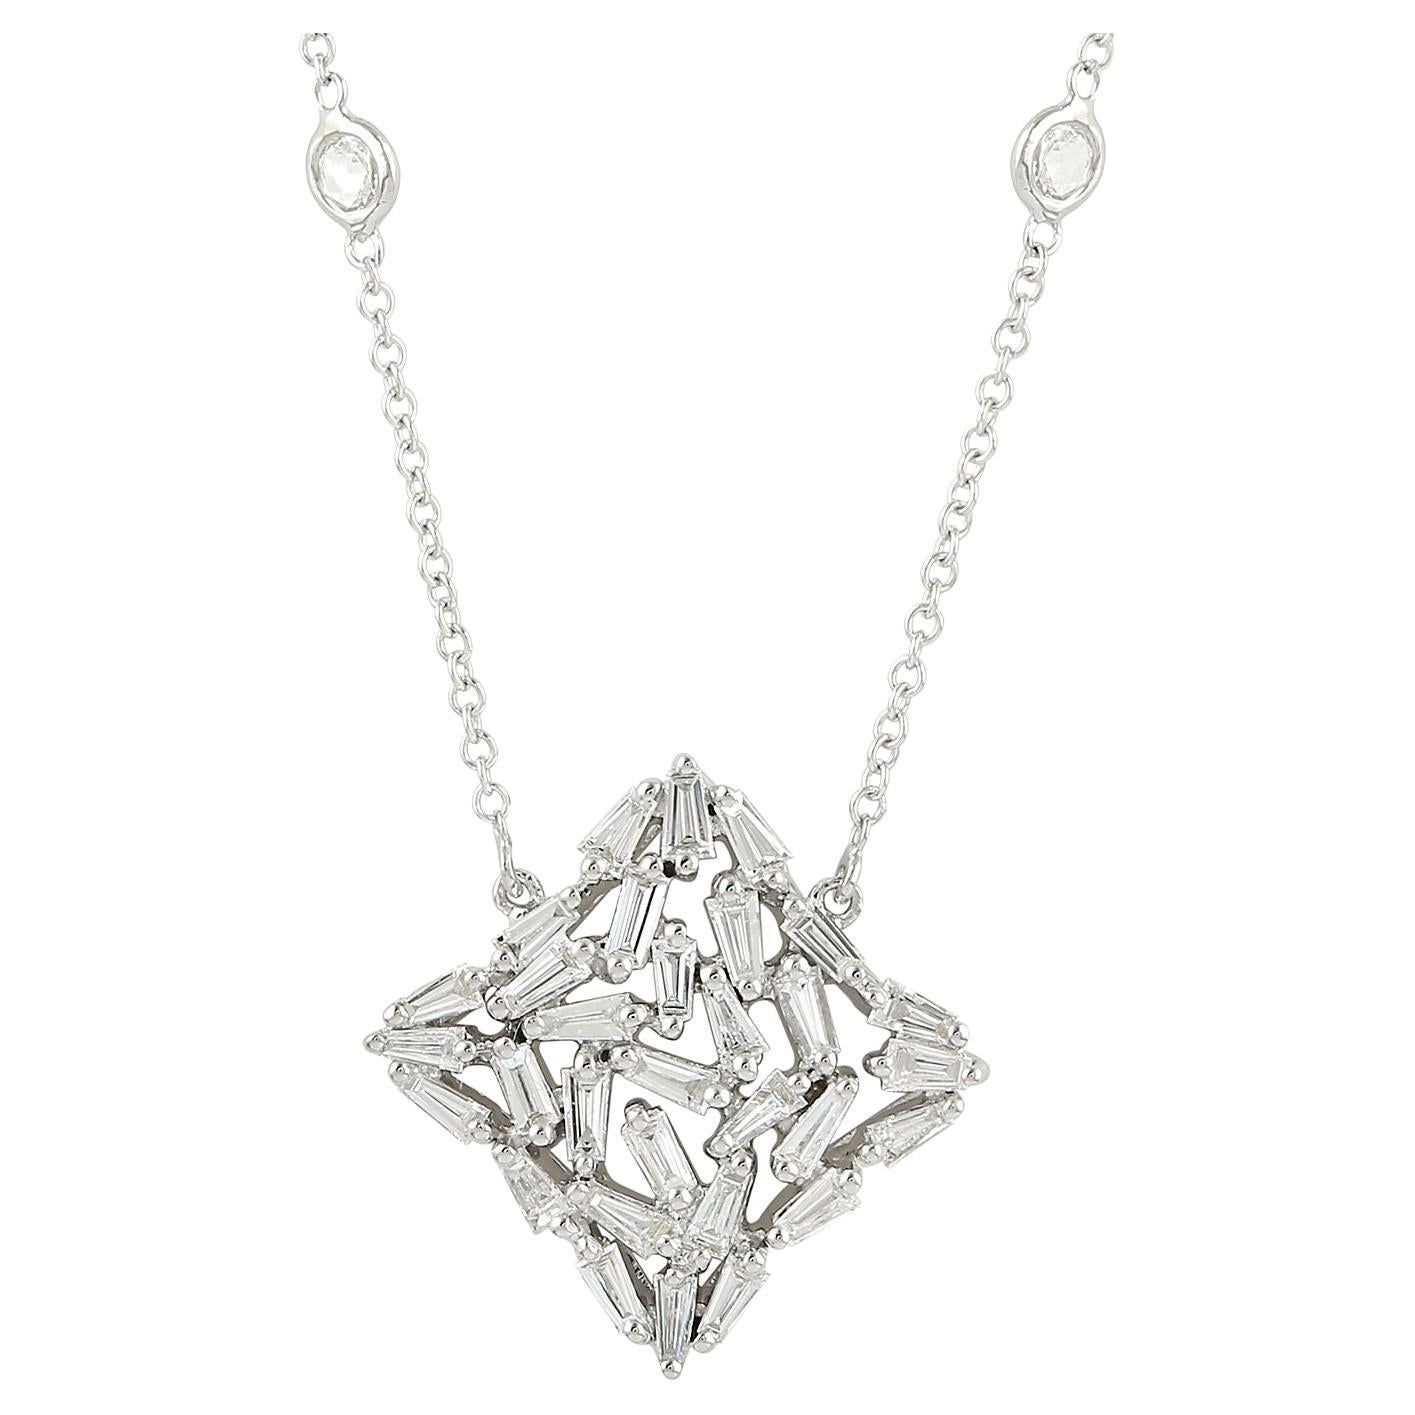 Designer Princess Necklace Made In 18k White Gold With Baguette Diamonds Charm For Sale